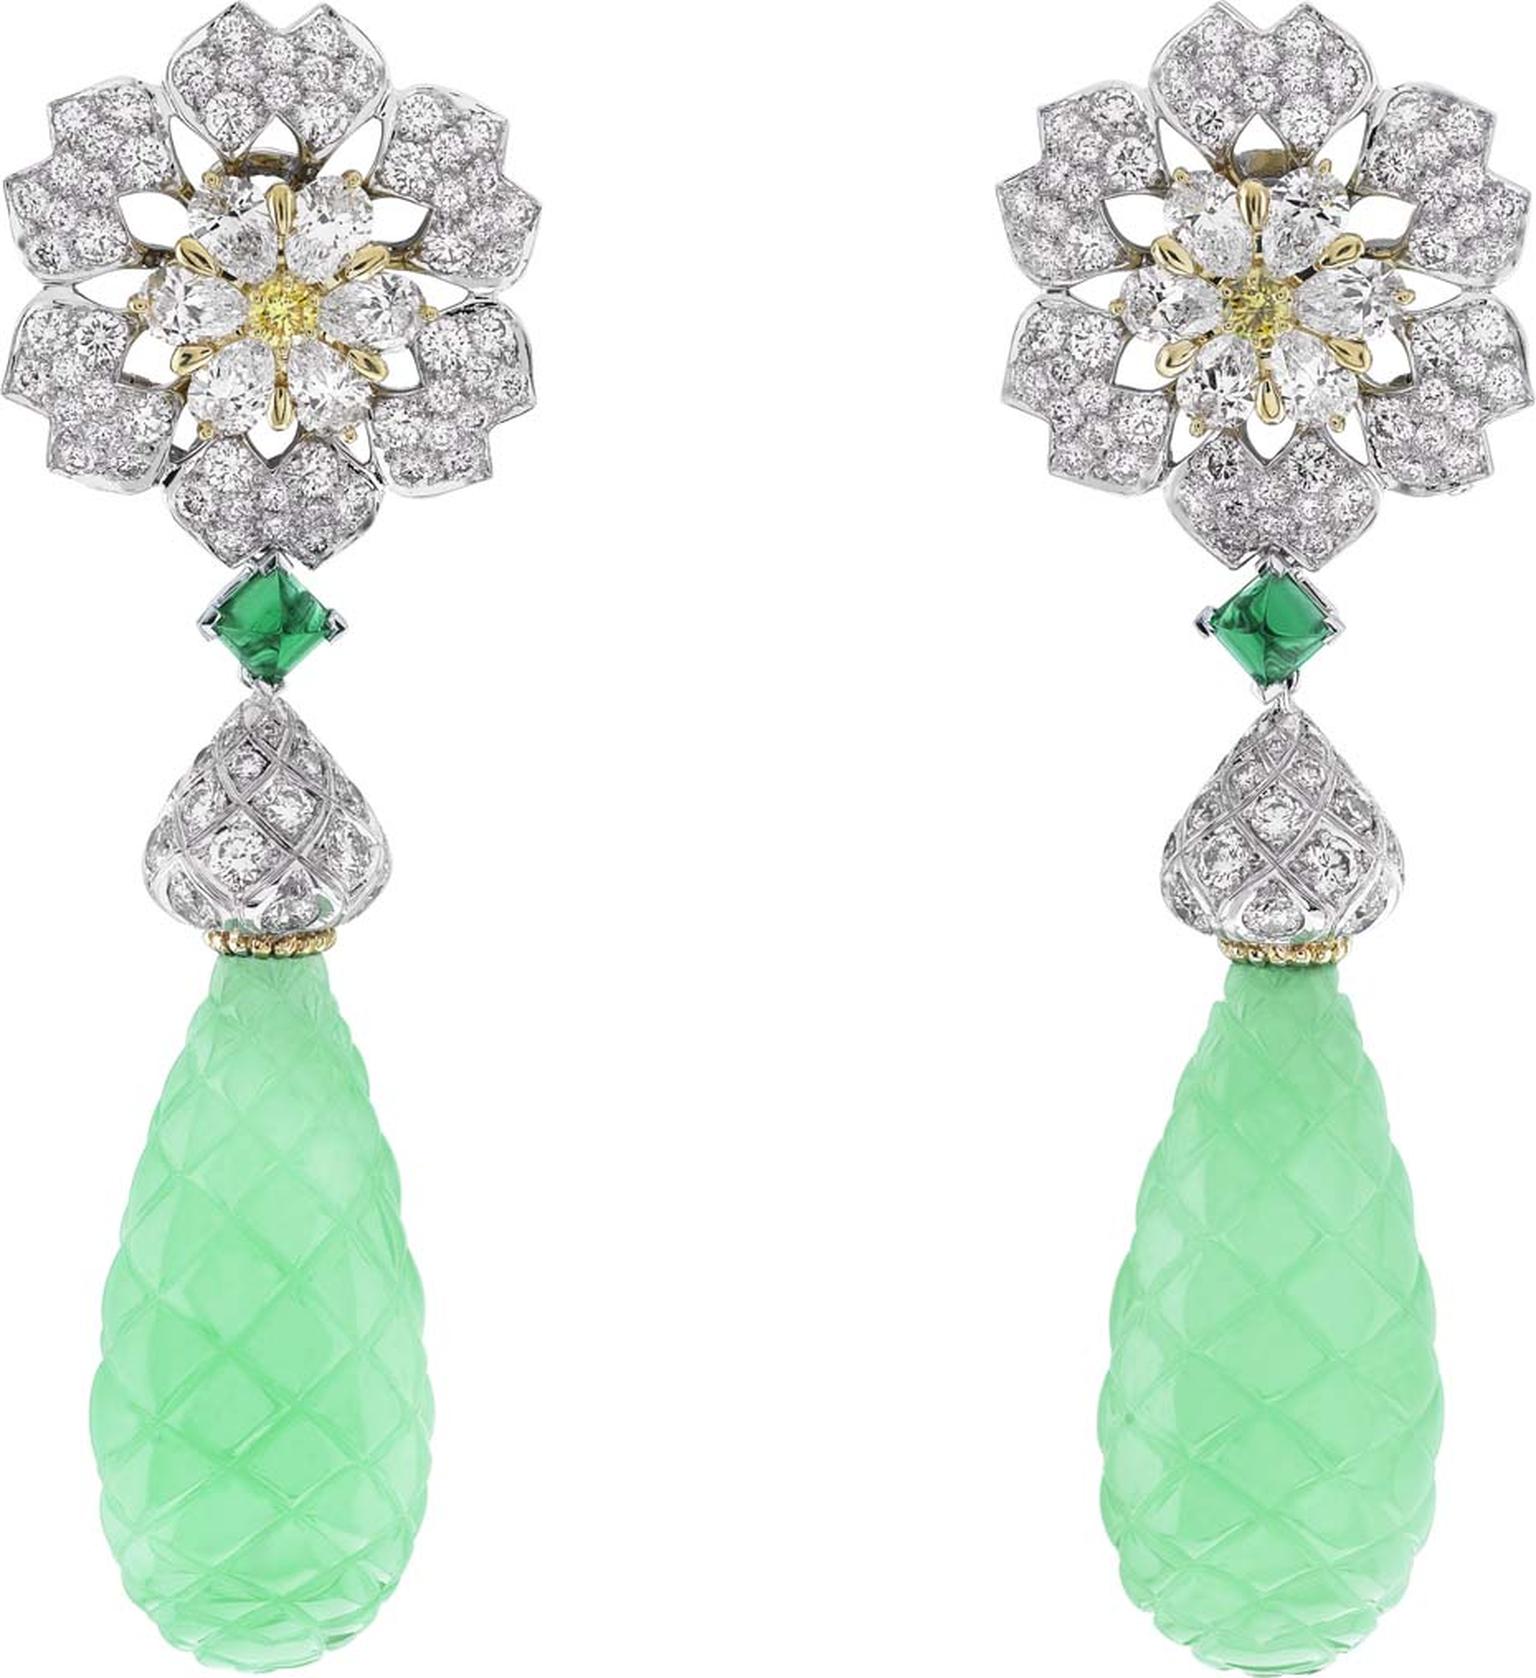 Van Cleef & Arpels Peau d'Âne collection Enchanted Forest white gold drop earrings with a white and yellow diamond flower motif above emerald cabochons and two carved chrysophrase.